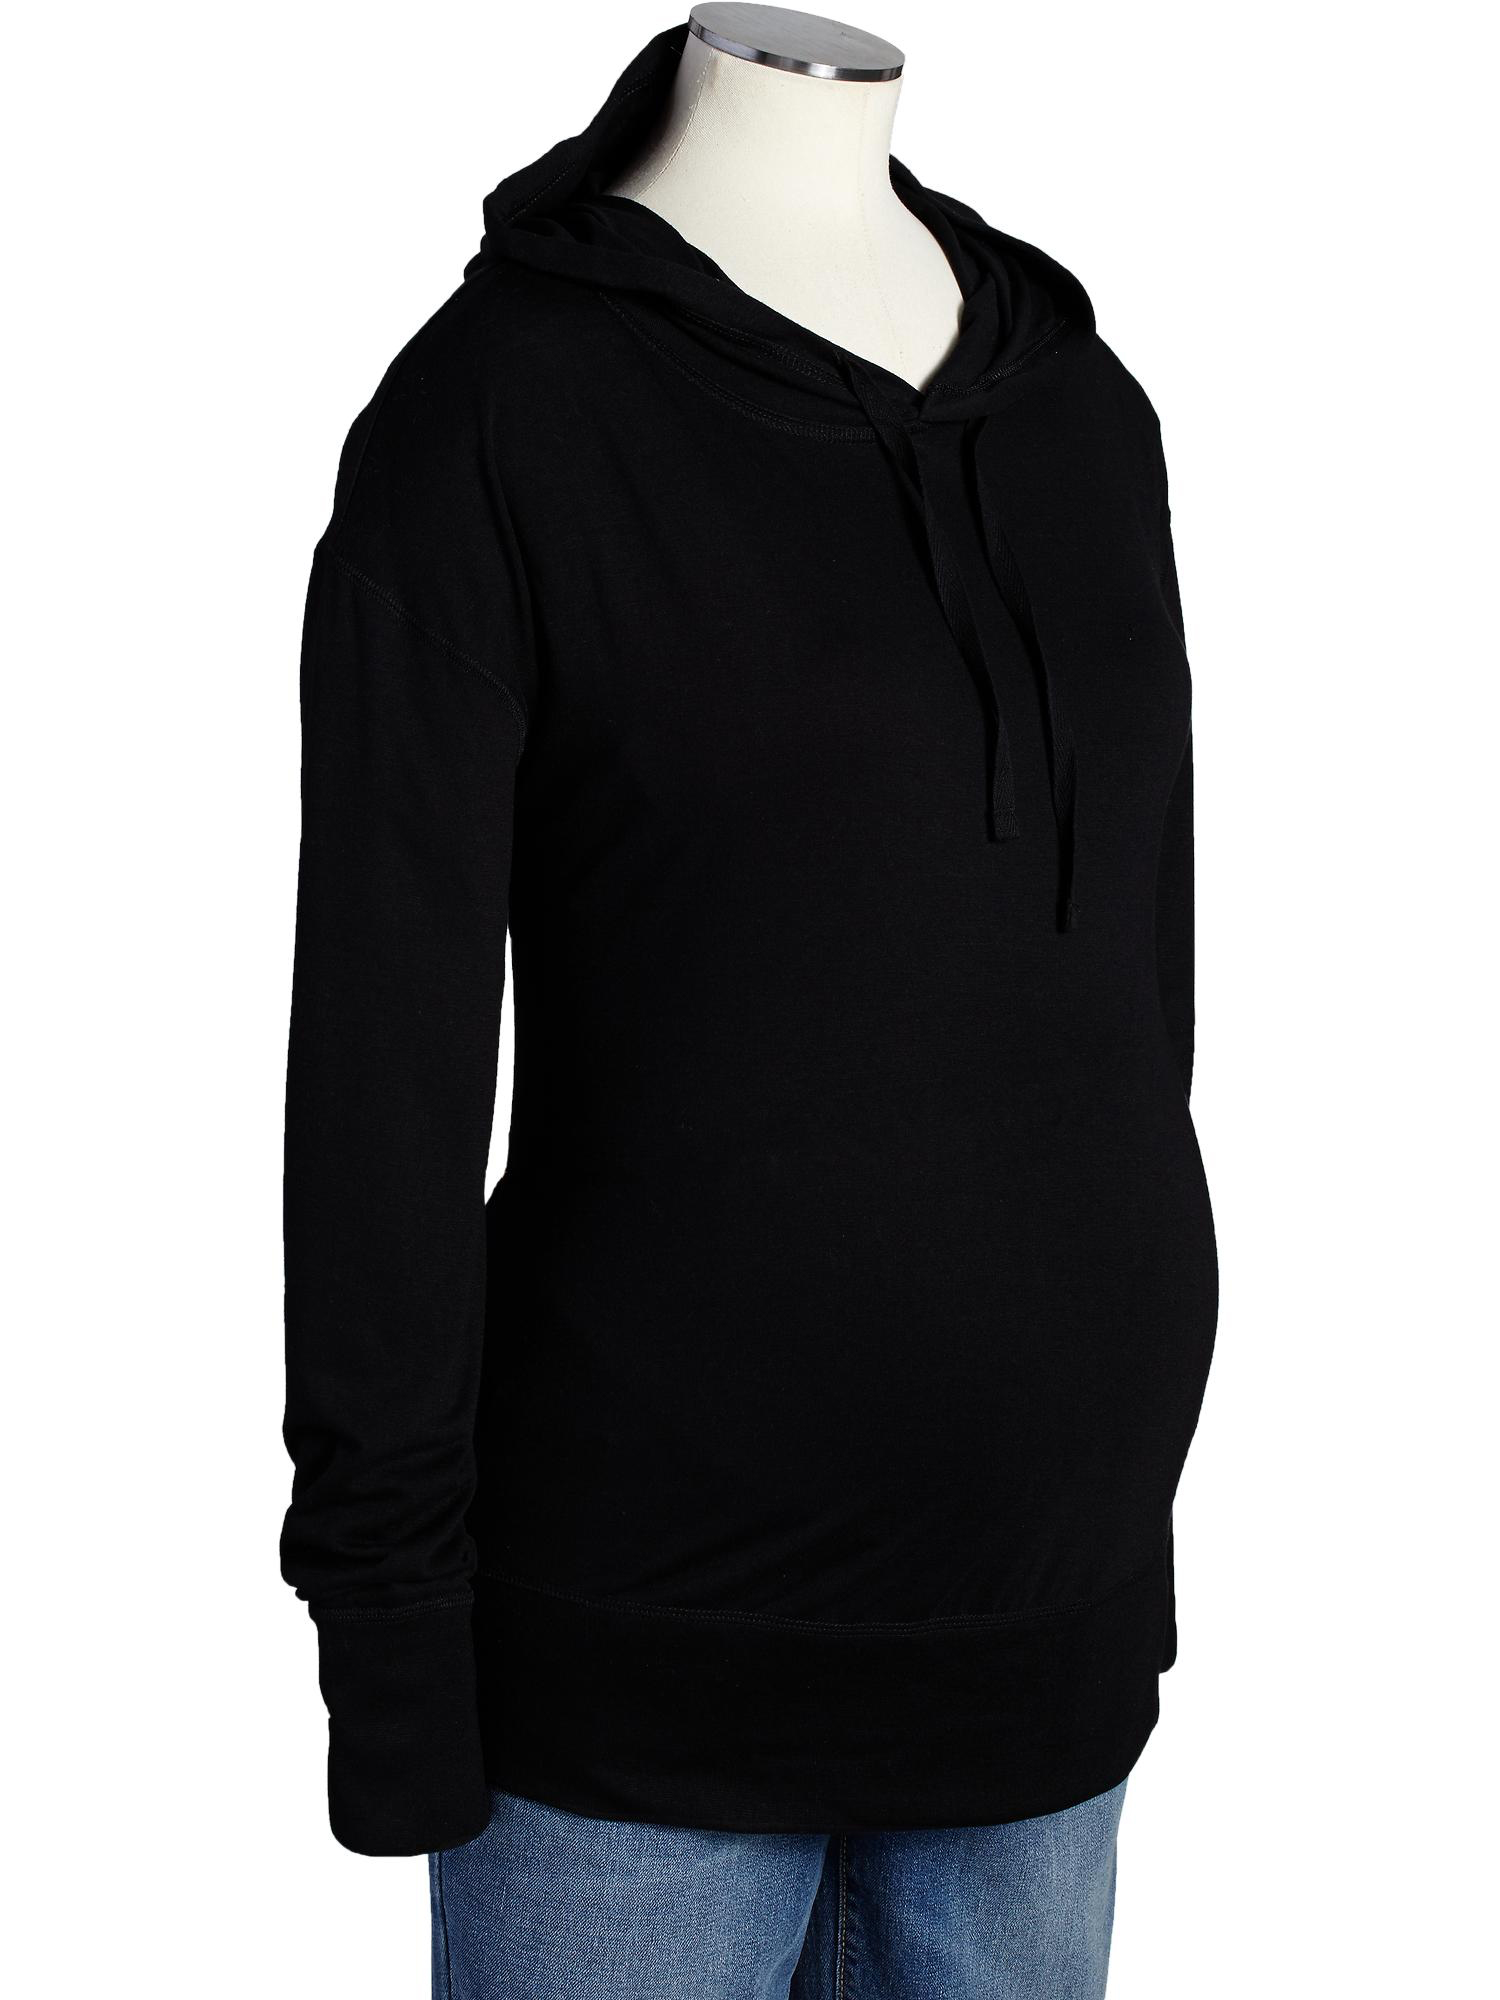 Maternity Super-Soft Hoodie from Old Navy